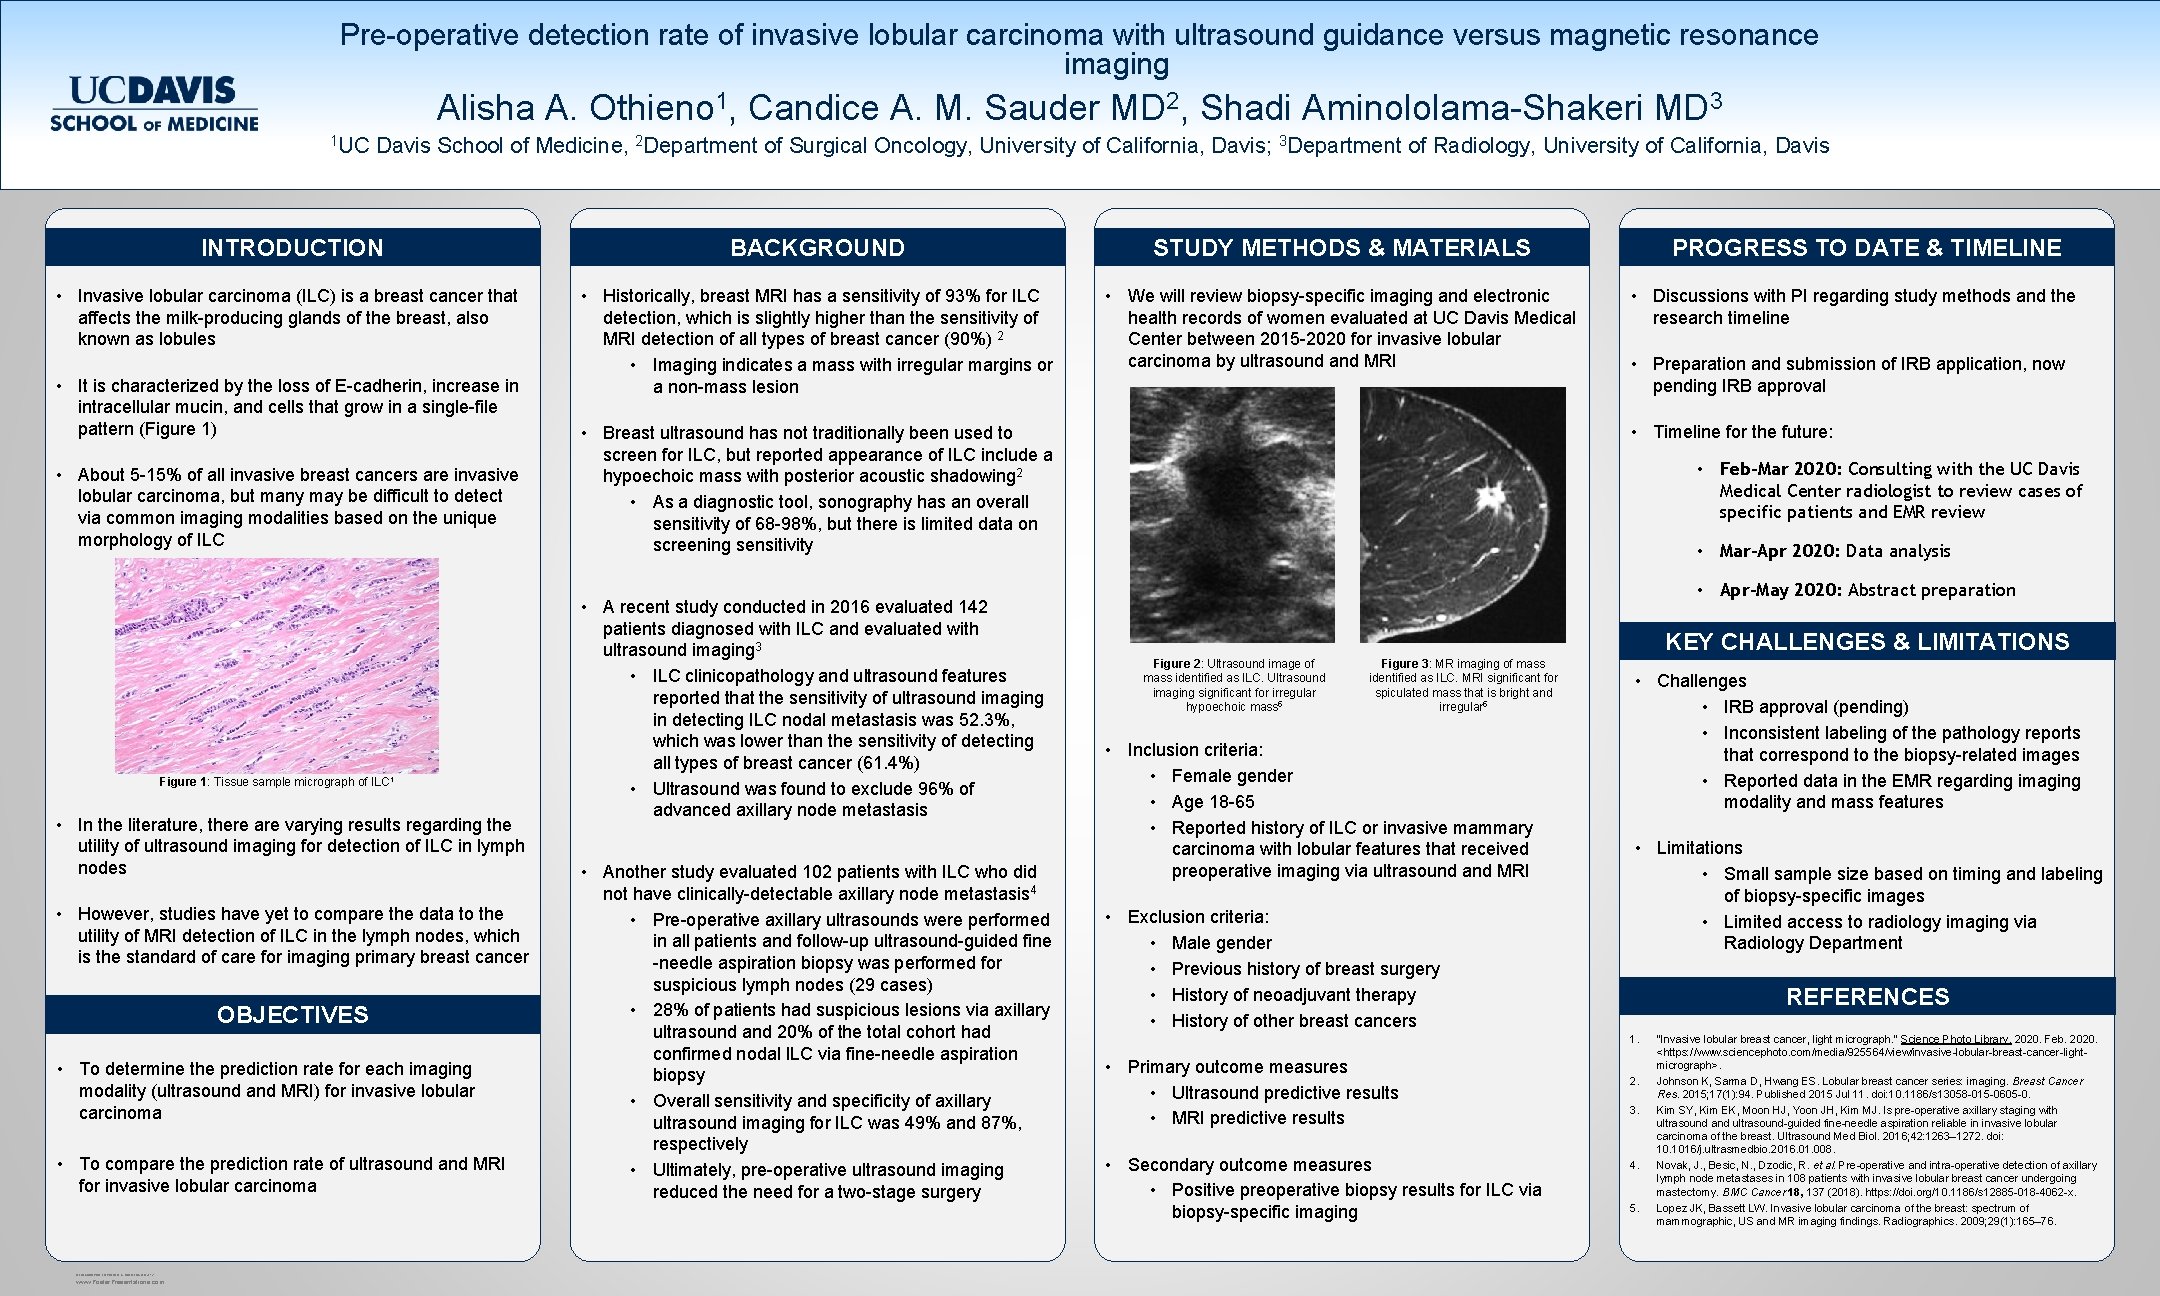 Pre-operative detection rate of invasive lobular carcinoma with ultrasound guidance versus magnetic resonance imaging